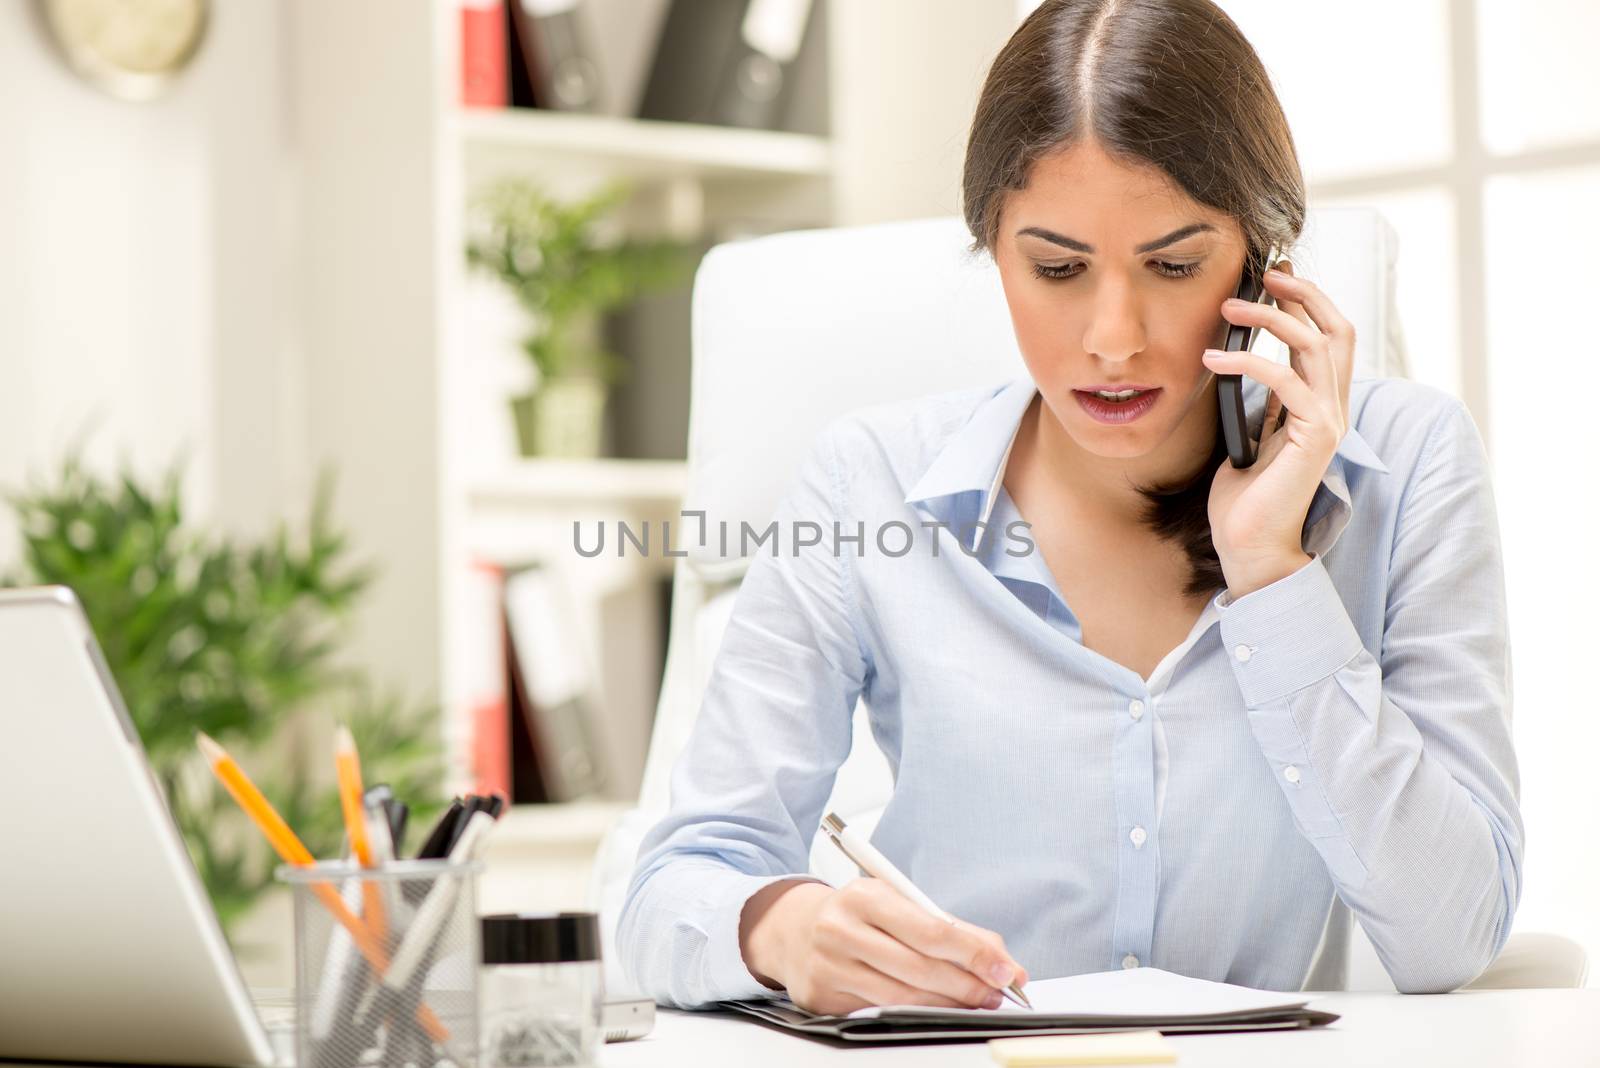 A young thinking businesswoman phoning with smart phone in office.